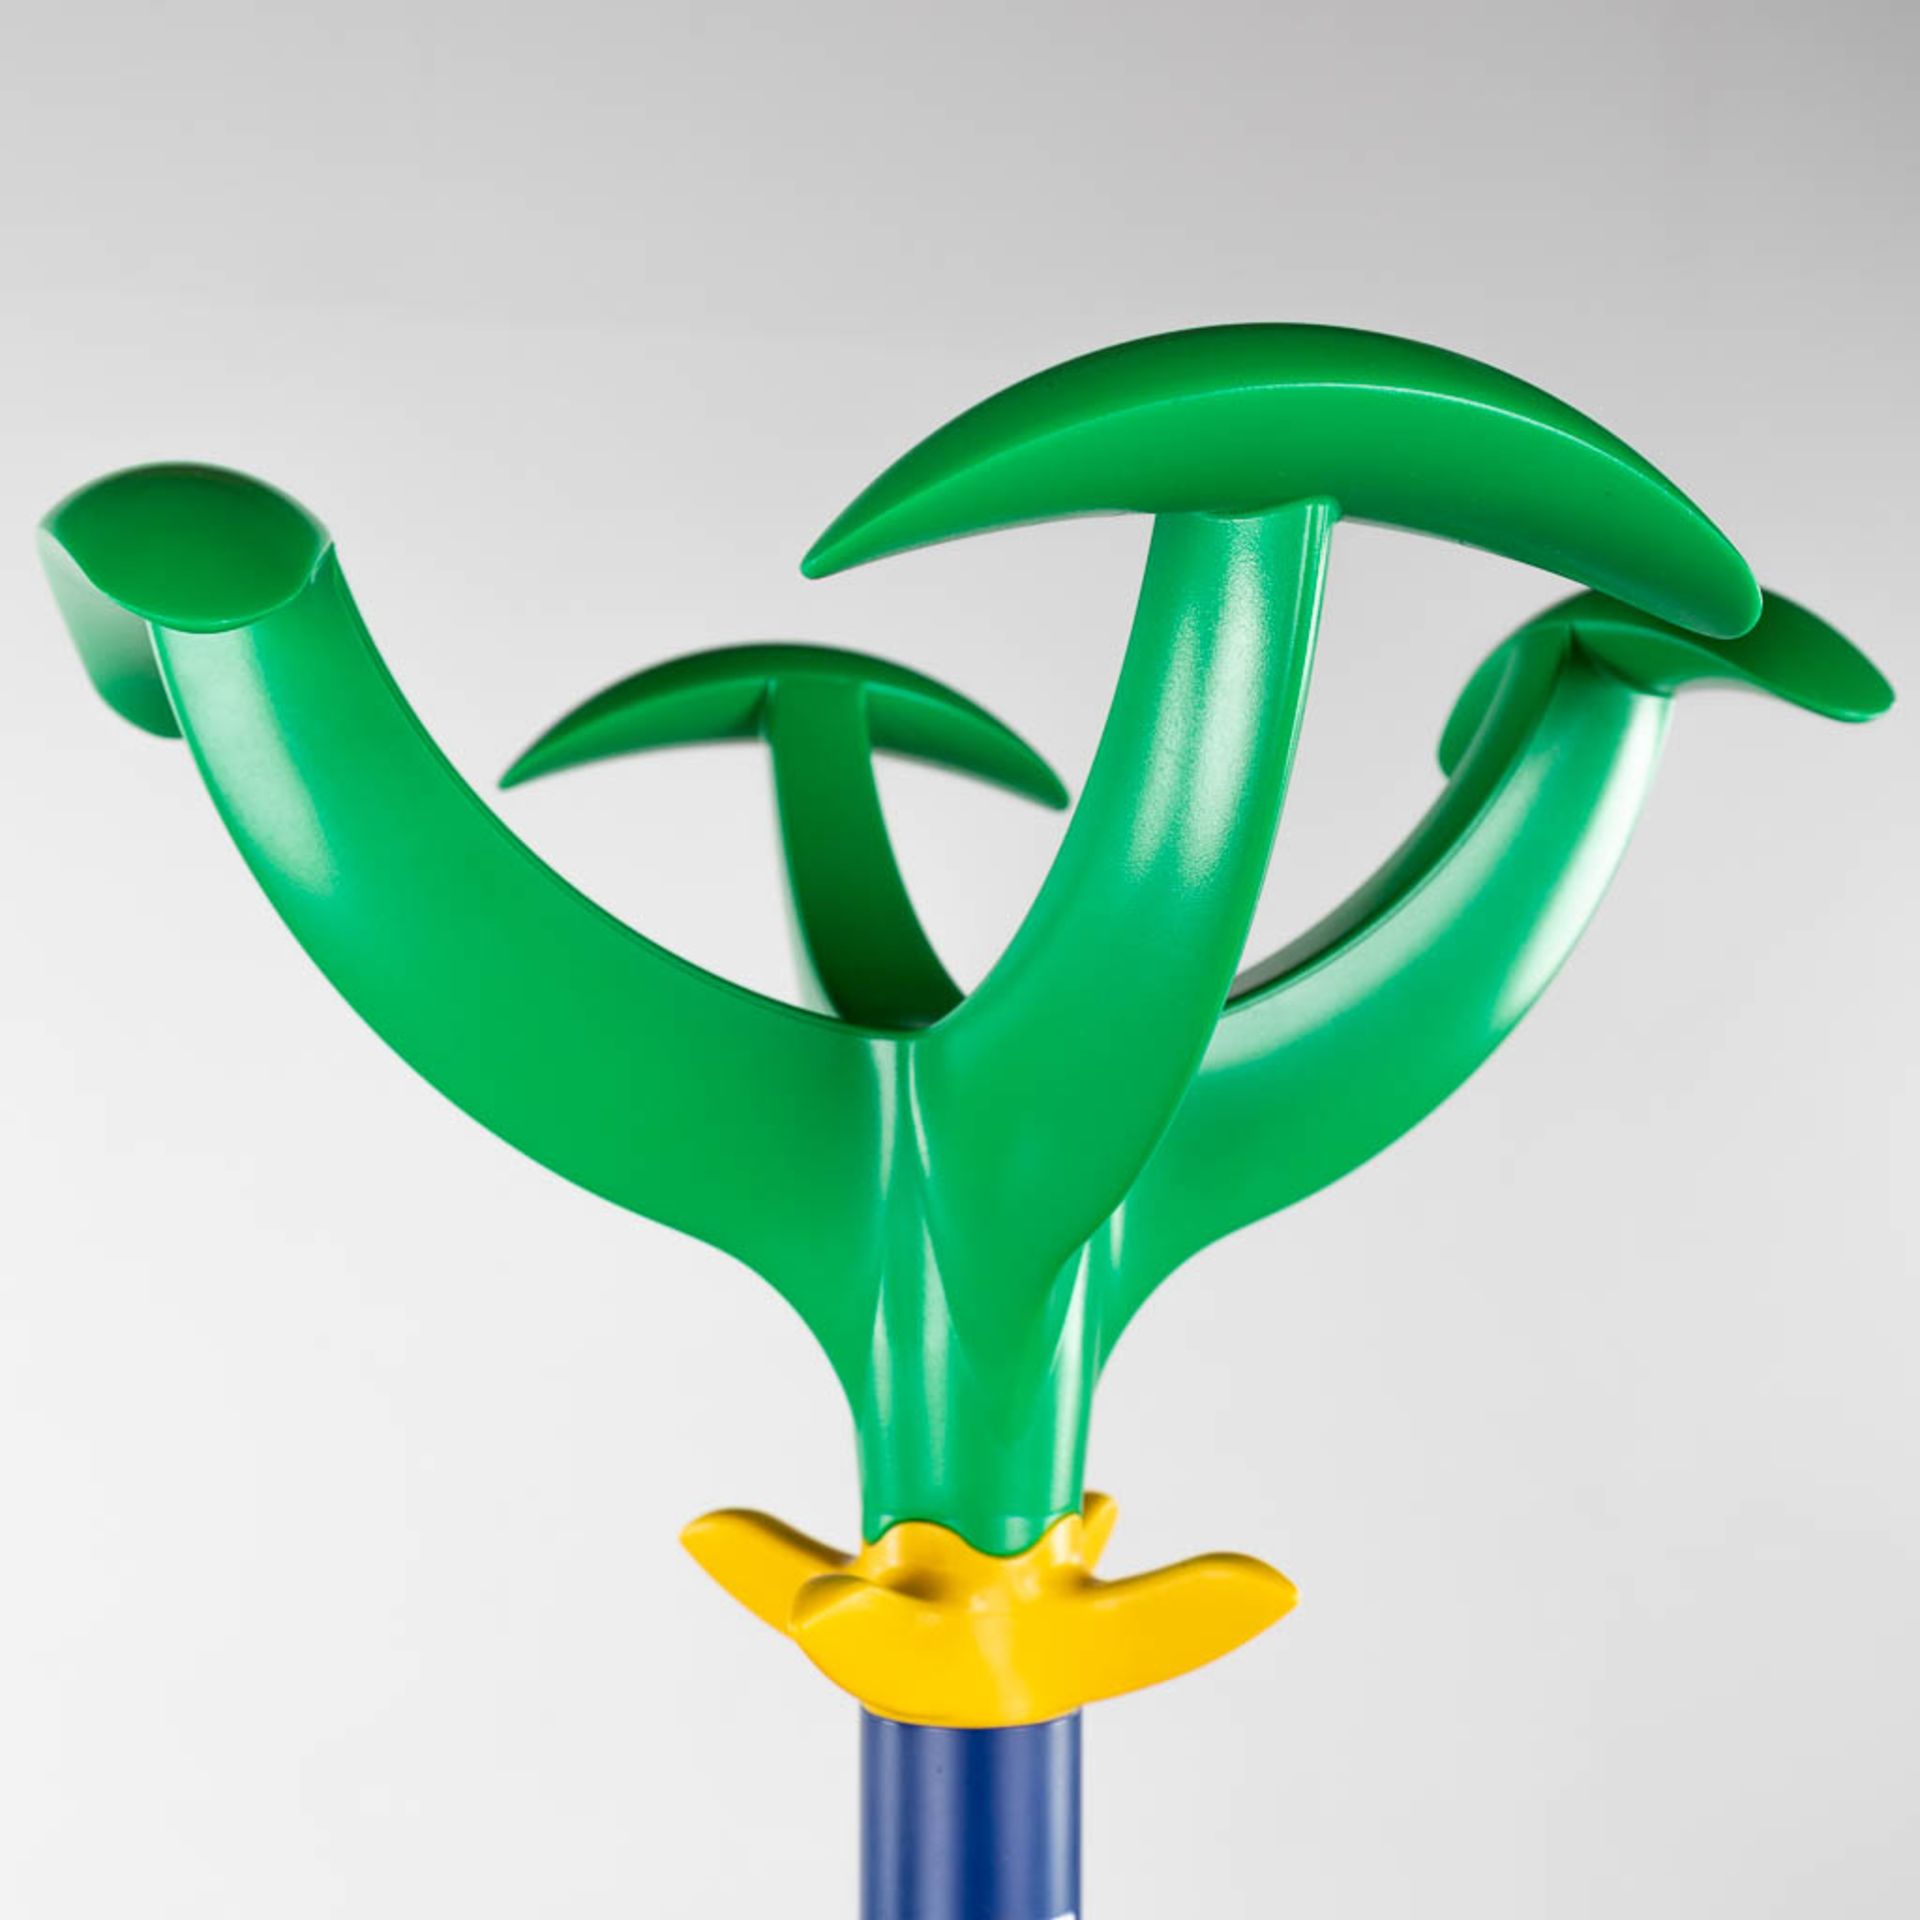 Raul BARBIERI (1946) 'Cactus' for Rexite, a coathanger. (H:165 x D:40 cm) - Image 6 of 13